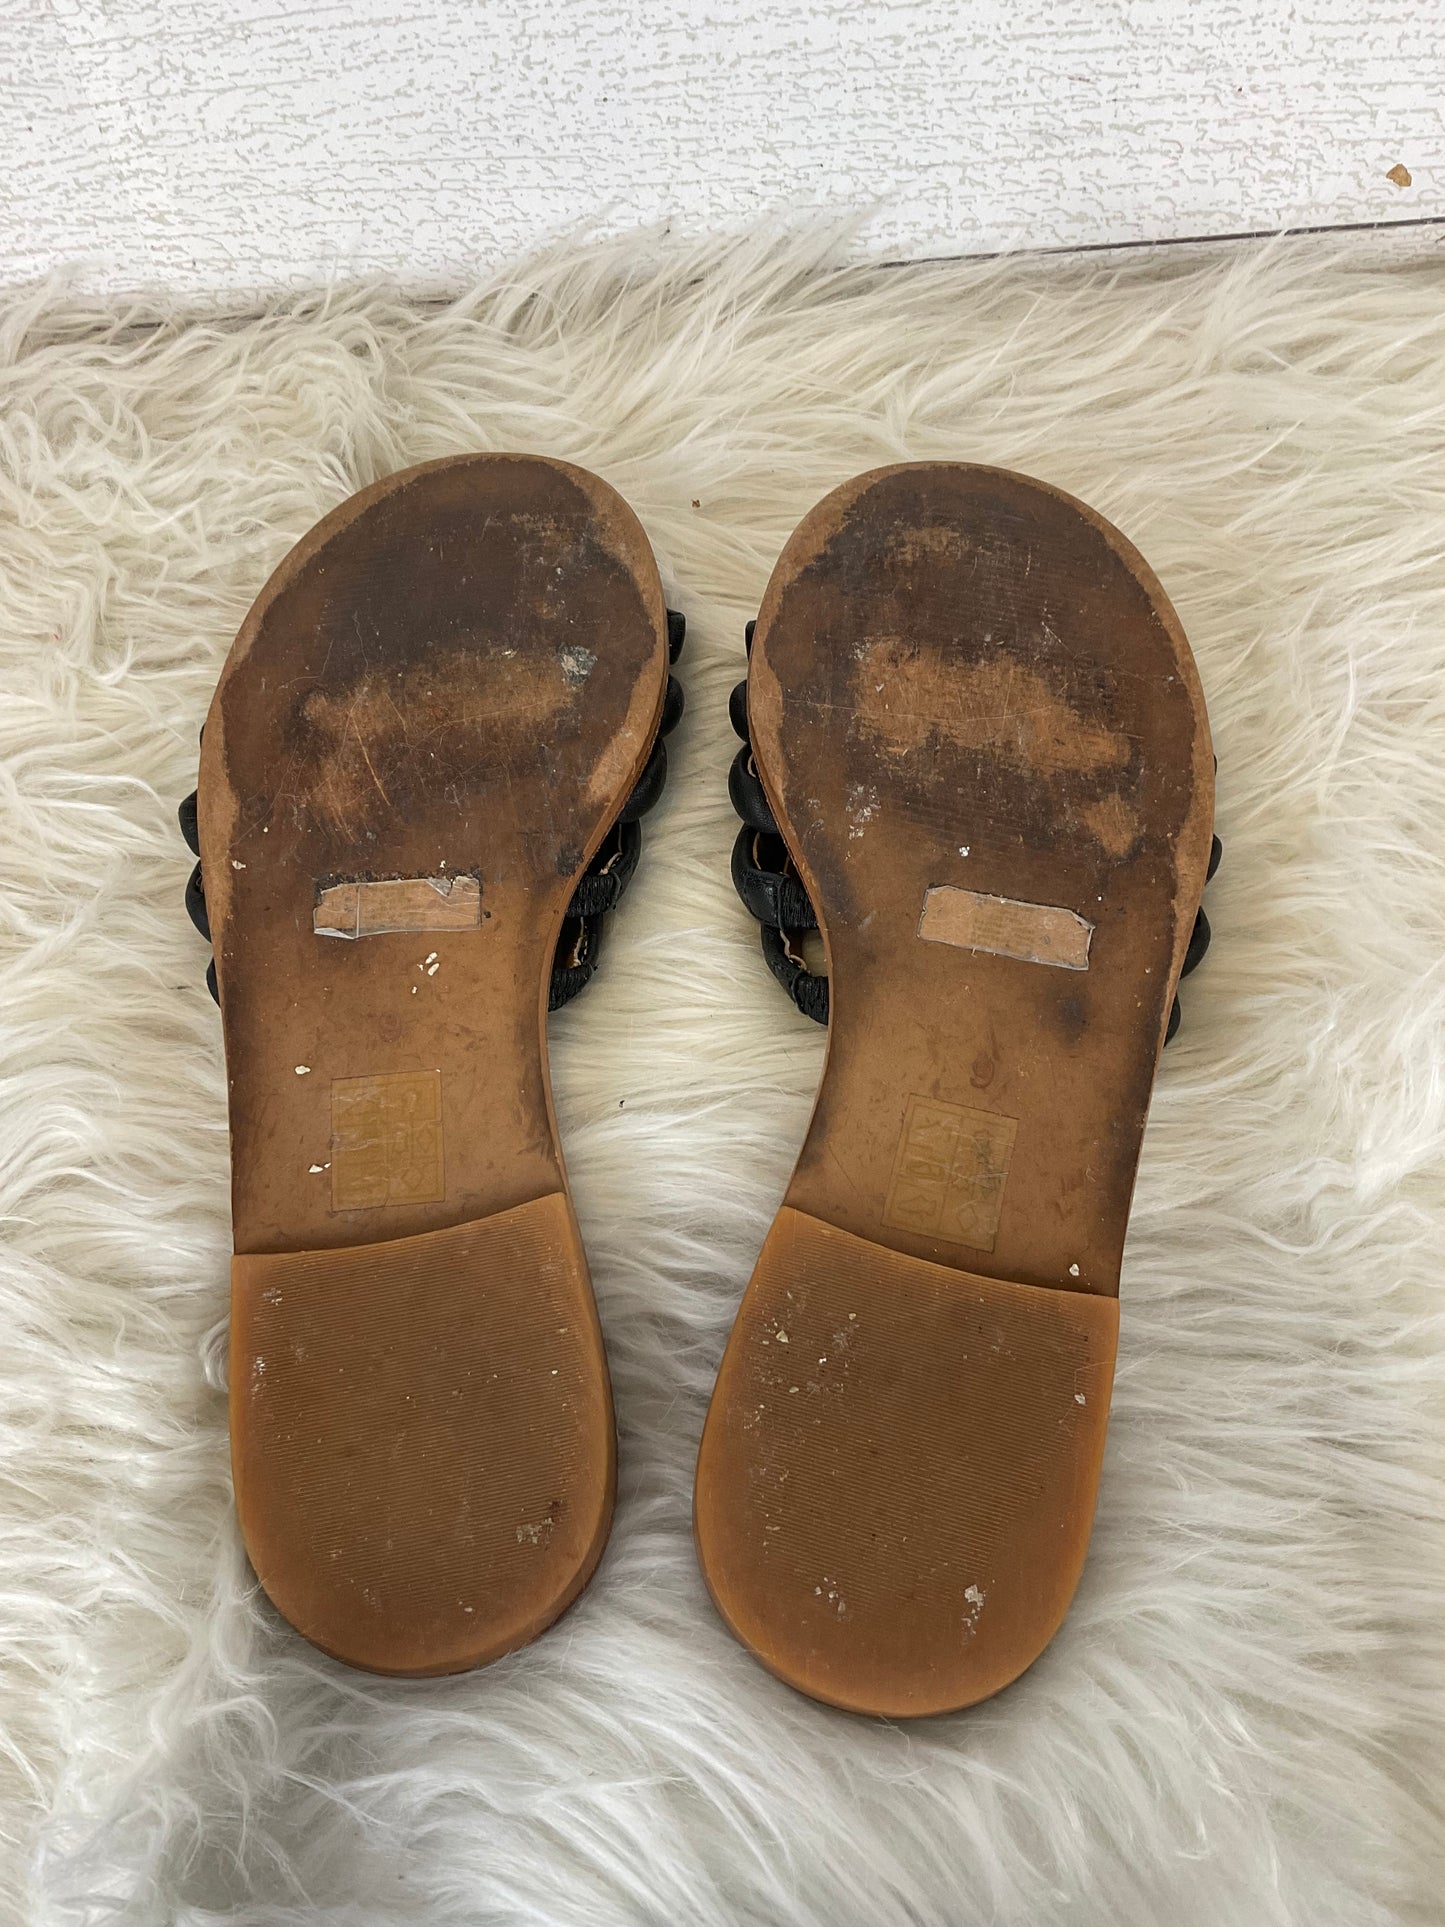 Sandals Flats By Madewell  Size: 9